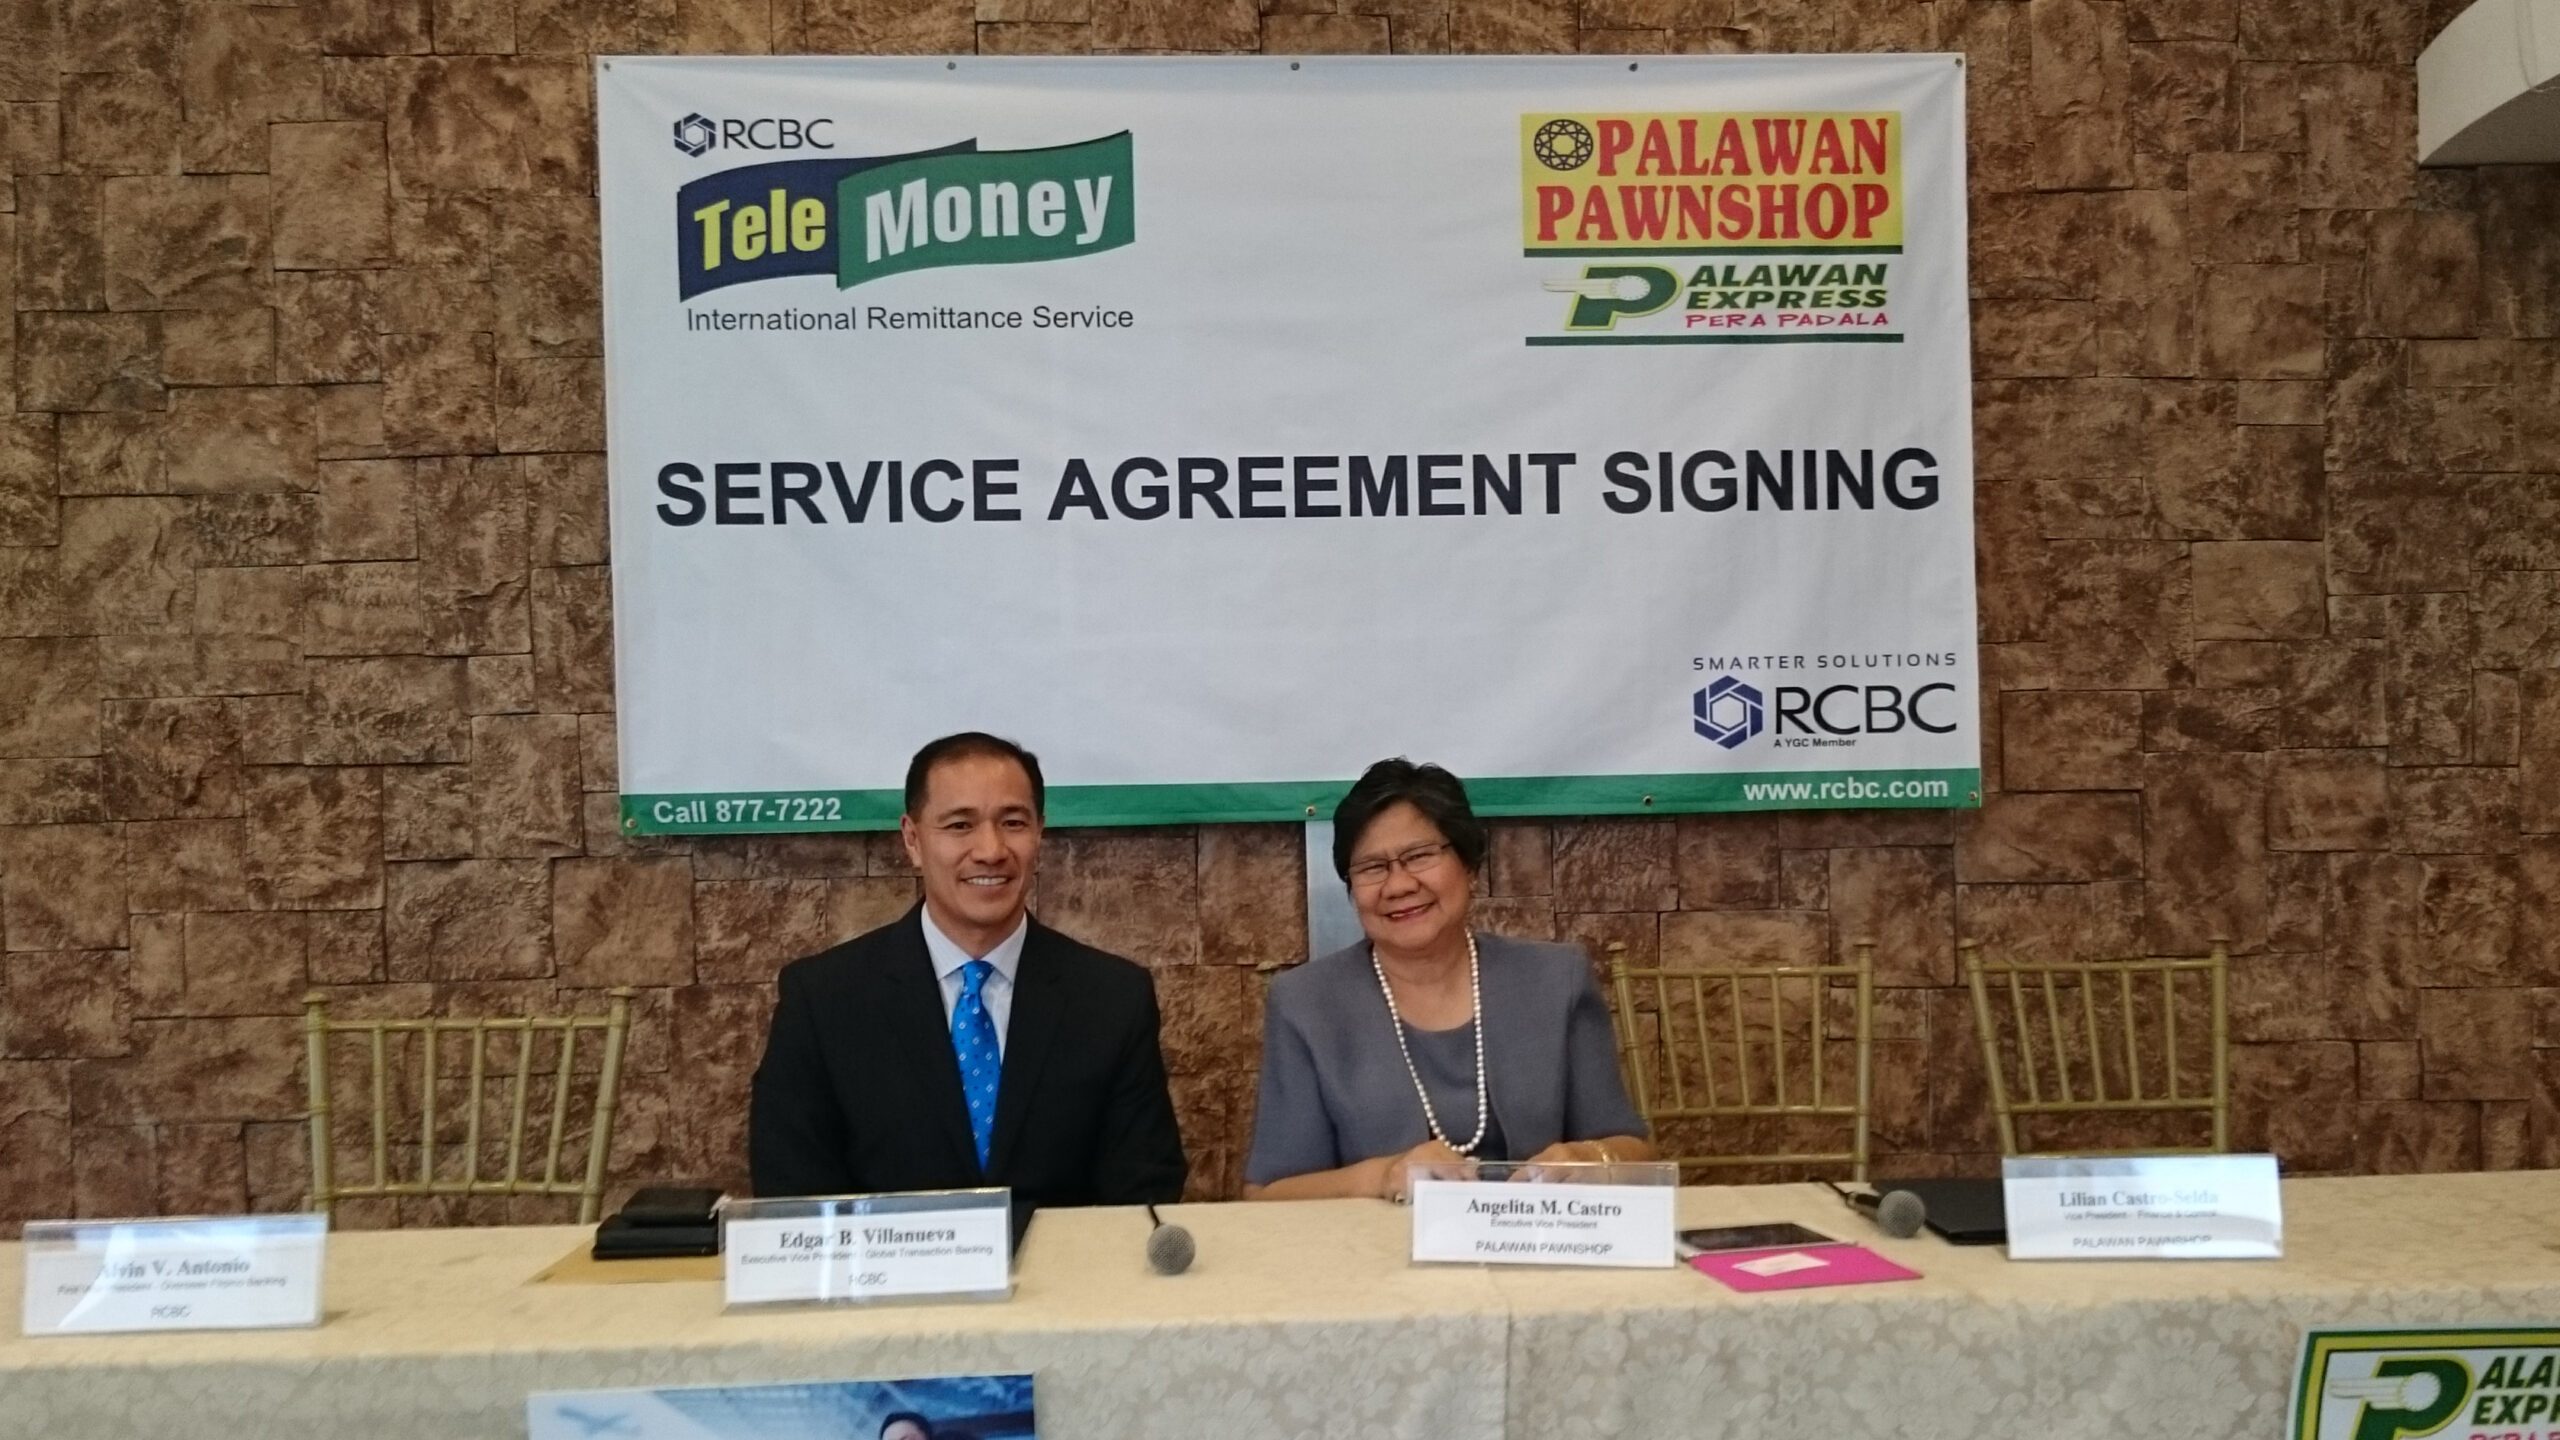 RCBC, Palawan Pawnshop tie up for wider remittances options